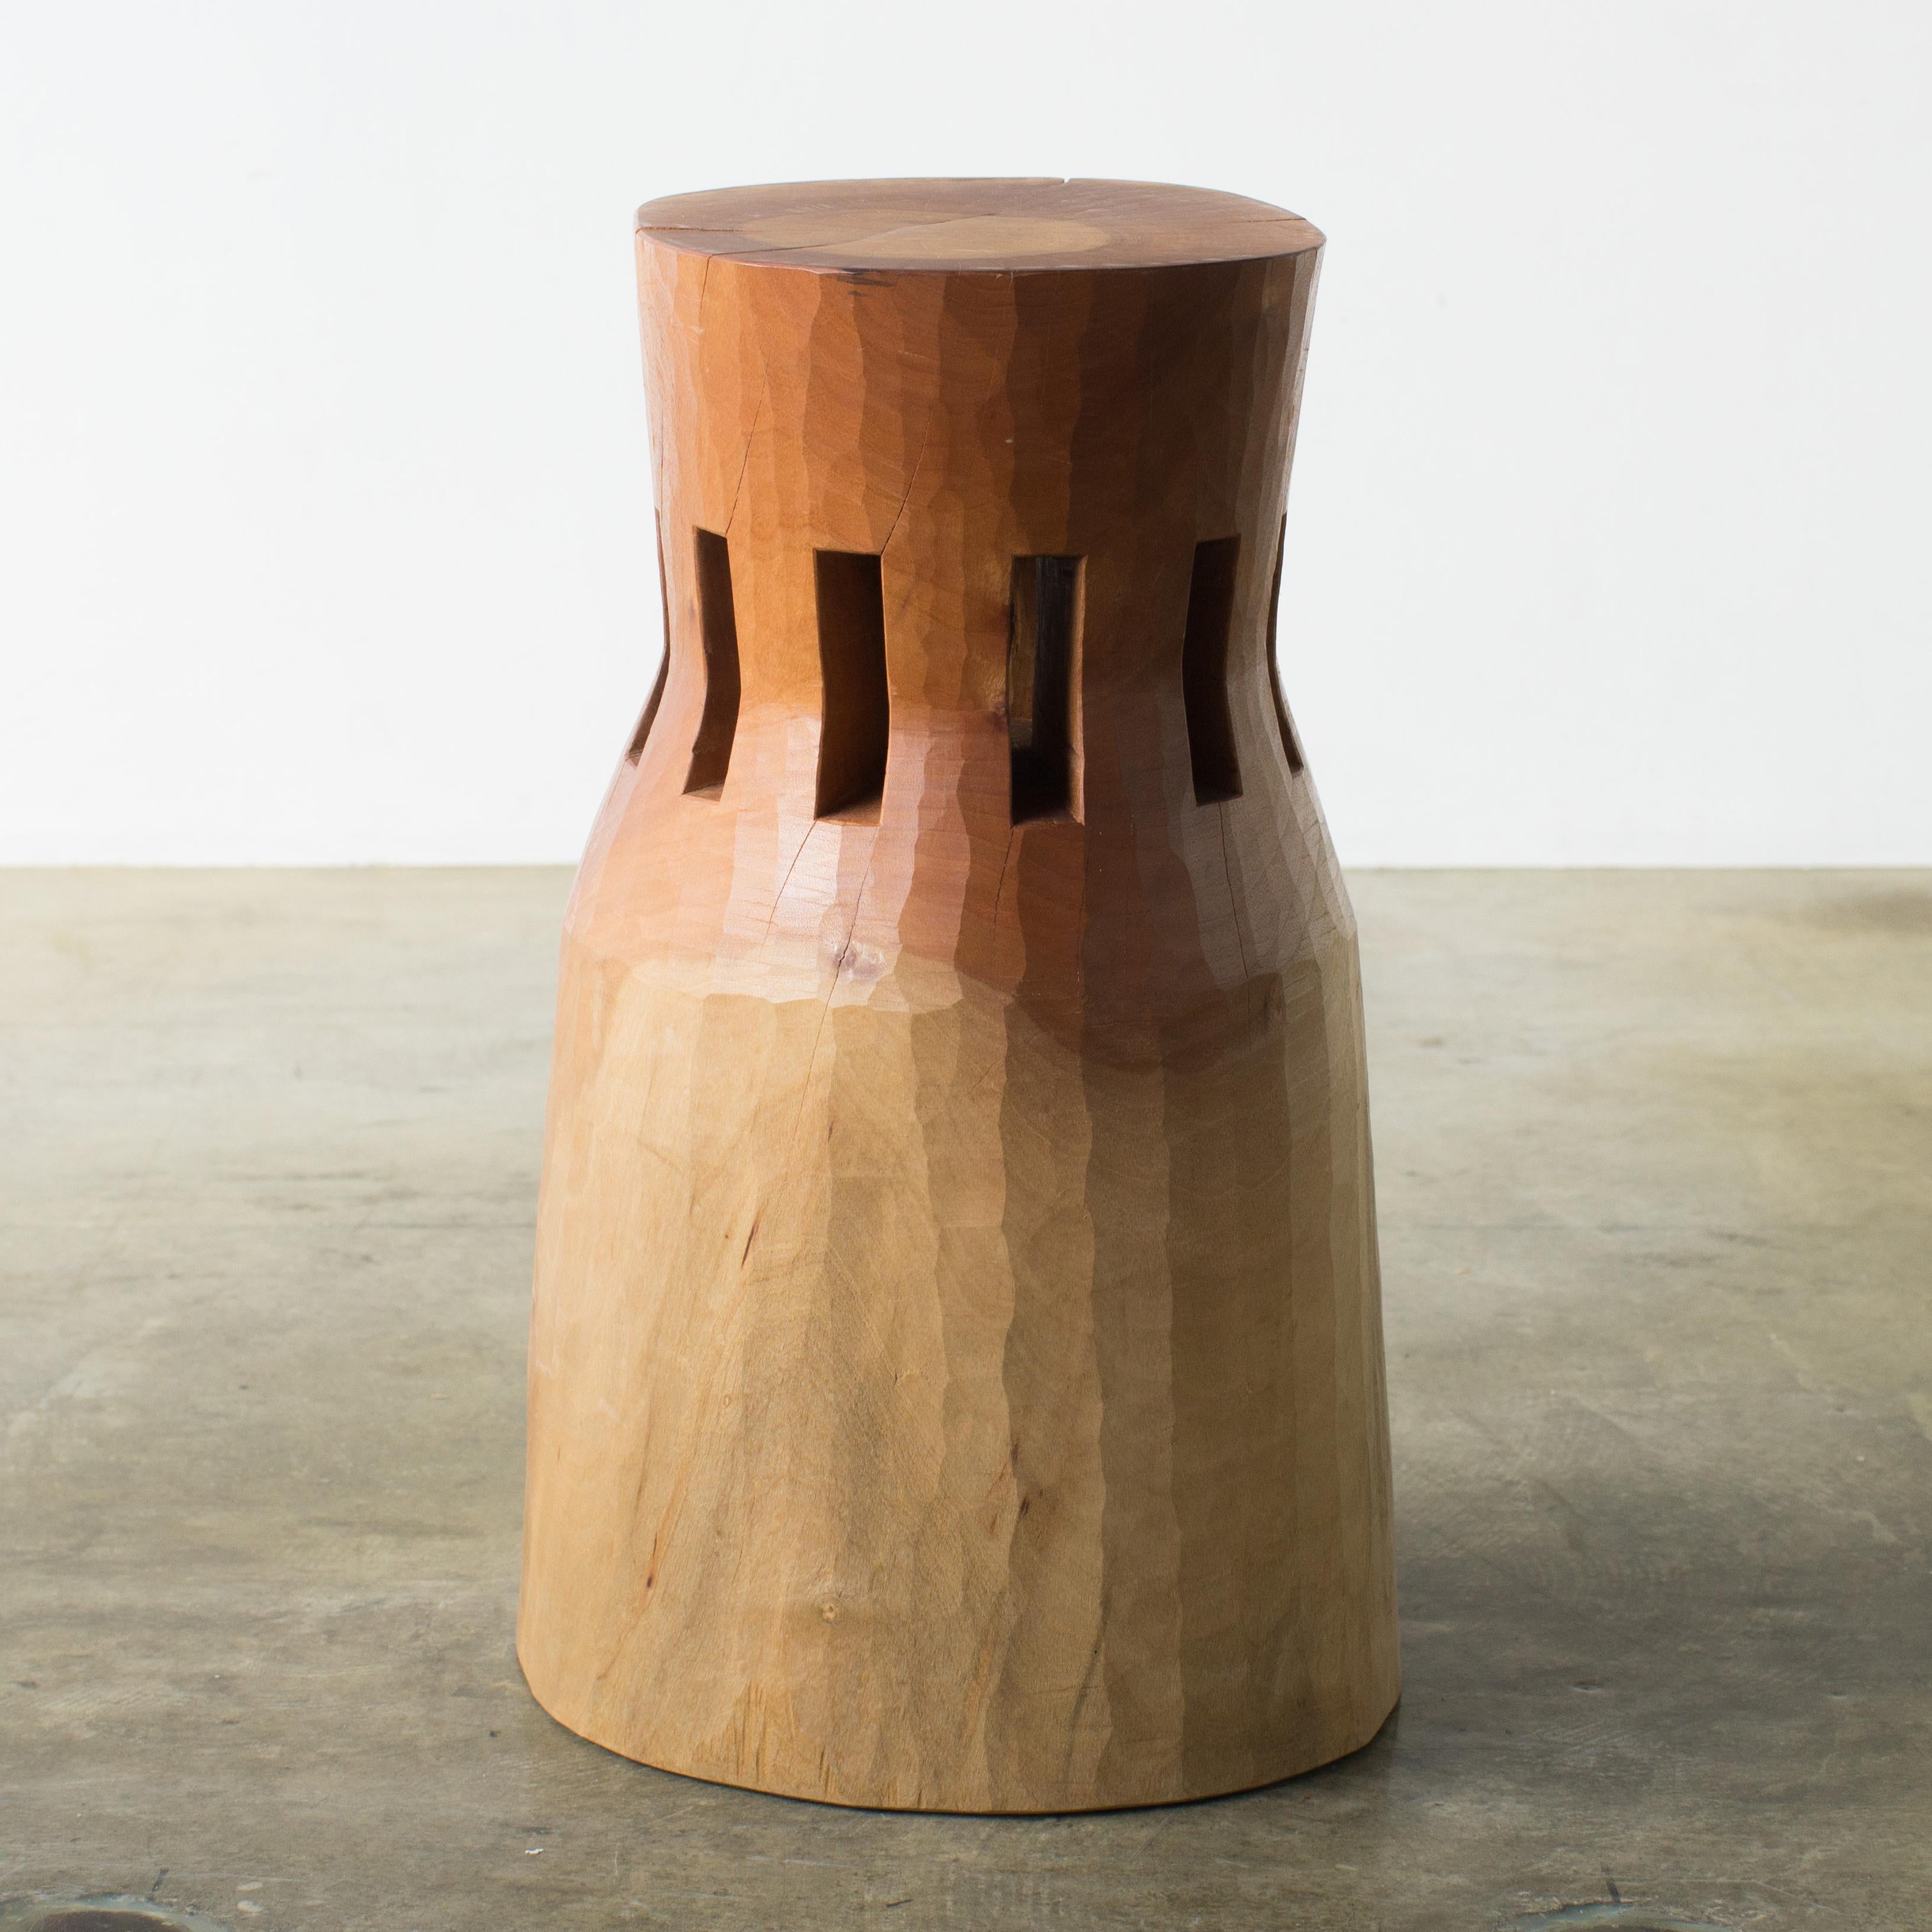 Name: City man
Sculptural stool by Hiroyuki Nishimura and zone carved furniture
Material: Machilus
This work is carved from log with some kinds of chainsaws.
Most of wood used for Nishimura's works are unable to use anything, these woods are